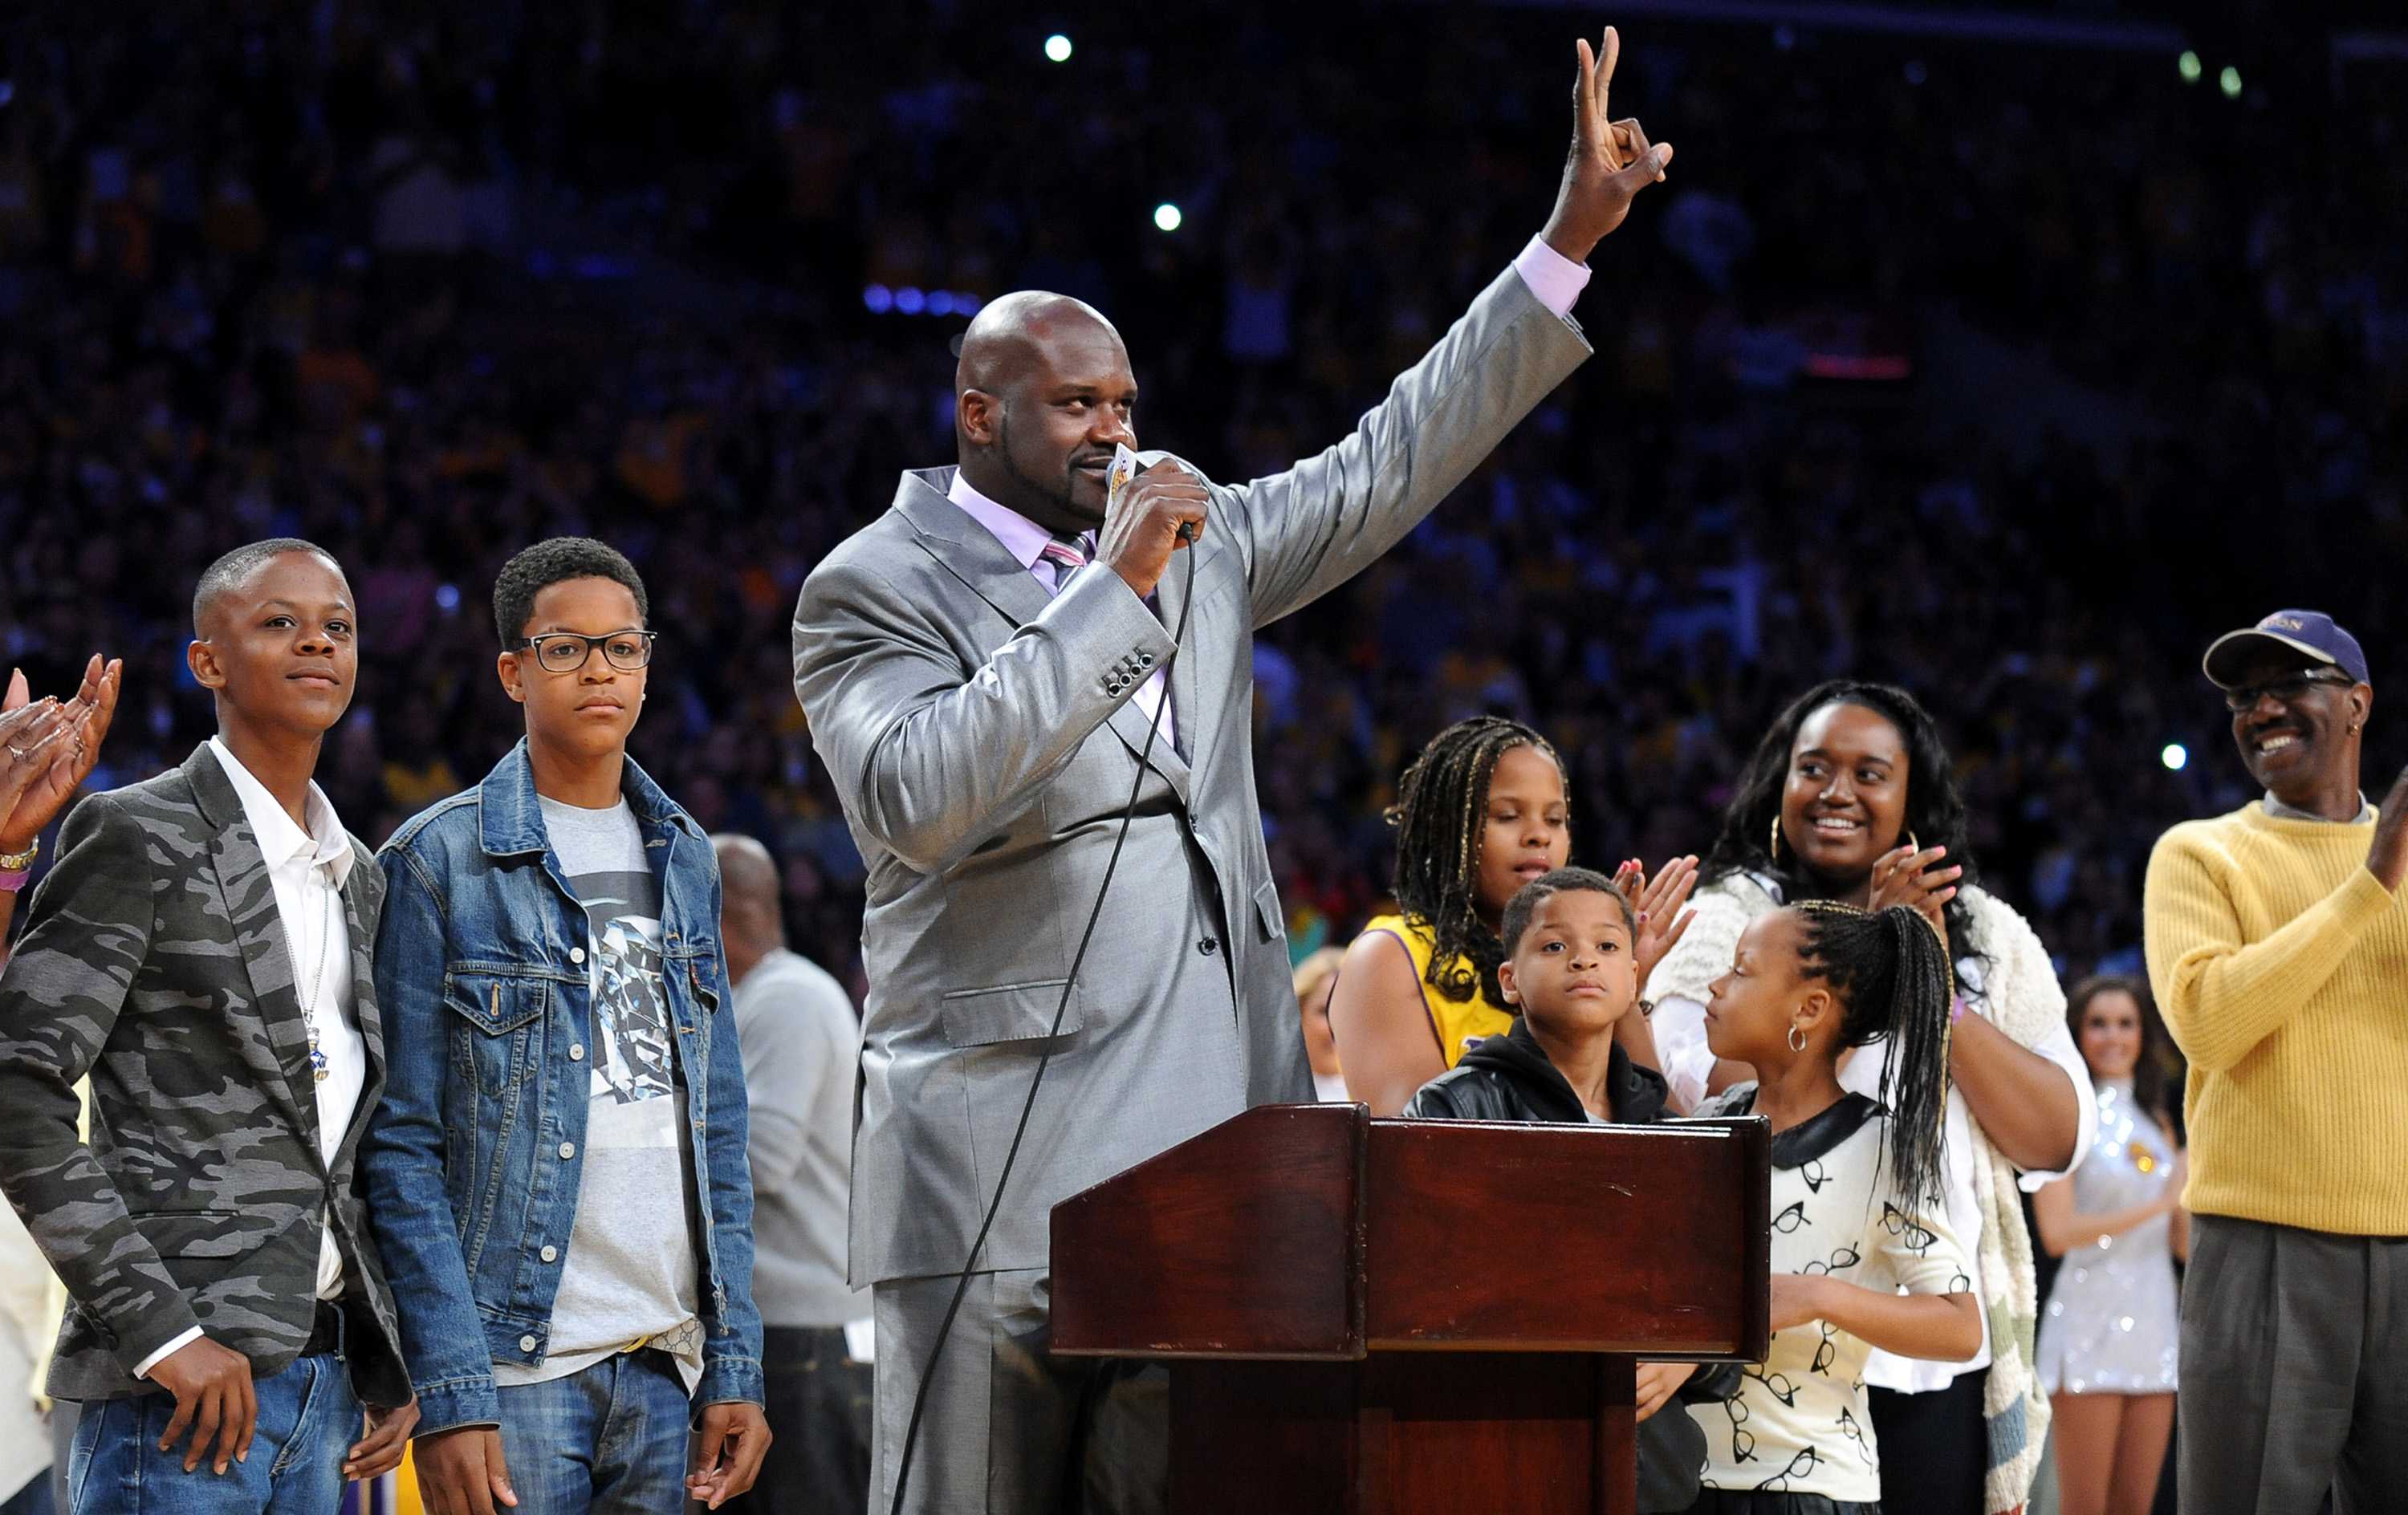 Former Los Angeles Lakers star Shaquille ONeal during a ceremony to retire his number before a game against the Dallas Mavericks at Staples Center in Los Angeles, California, on Tuesday, April 2, 2013. (Wally Skalij/Los Angeles Times/MCT)